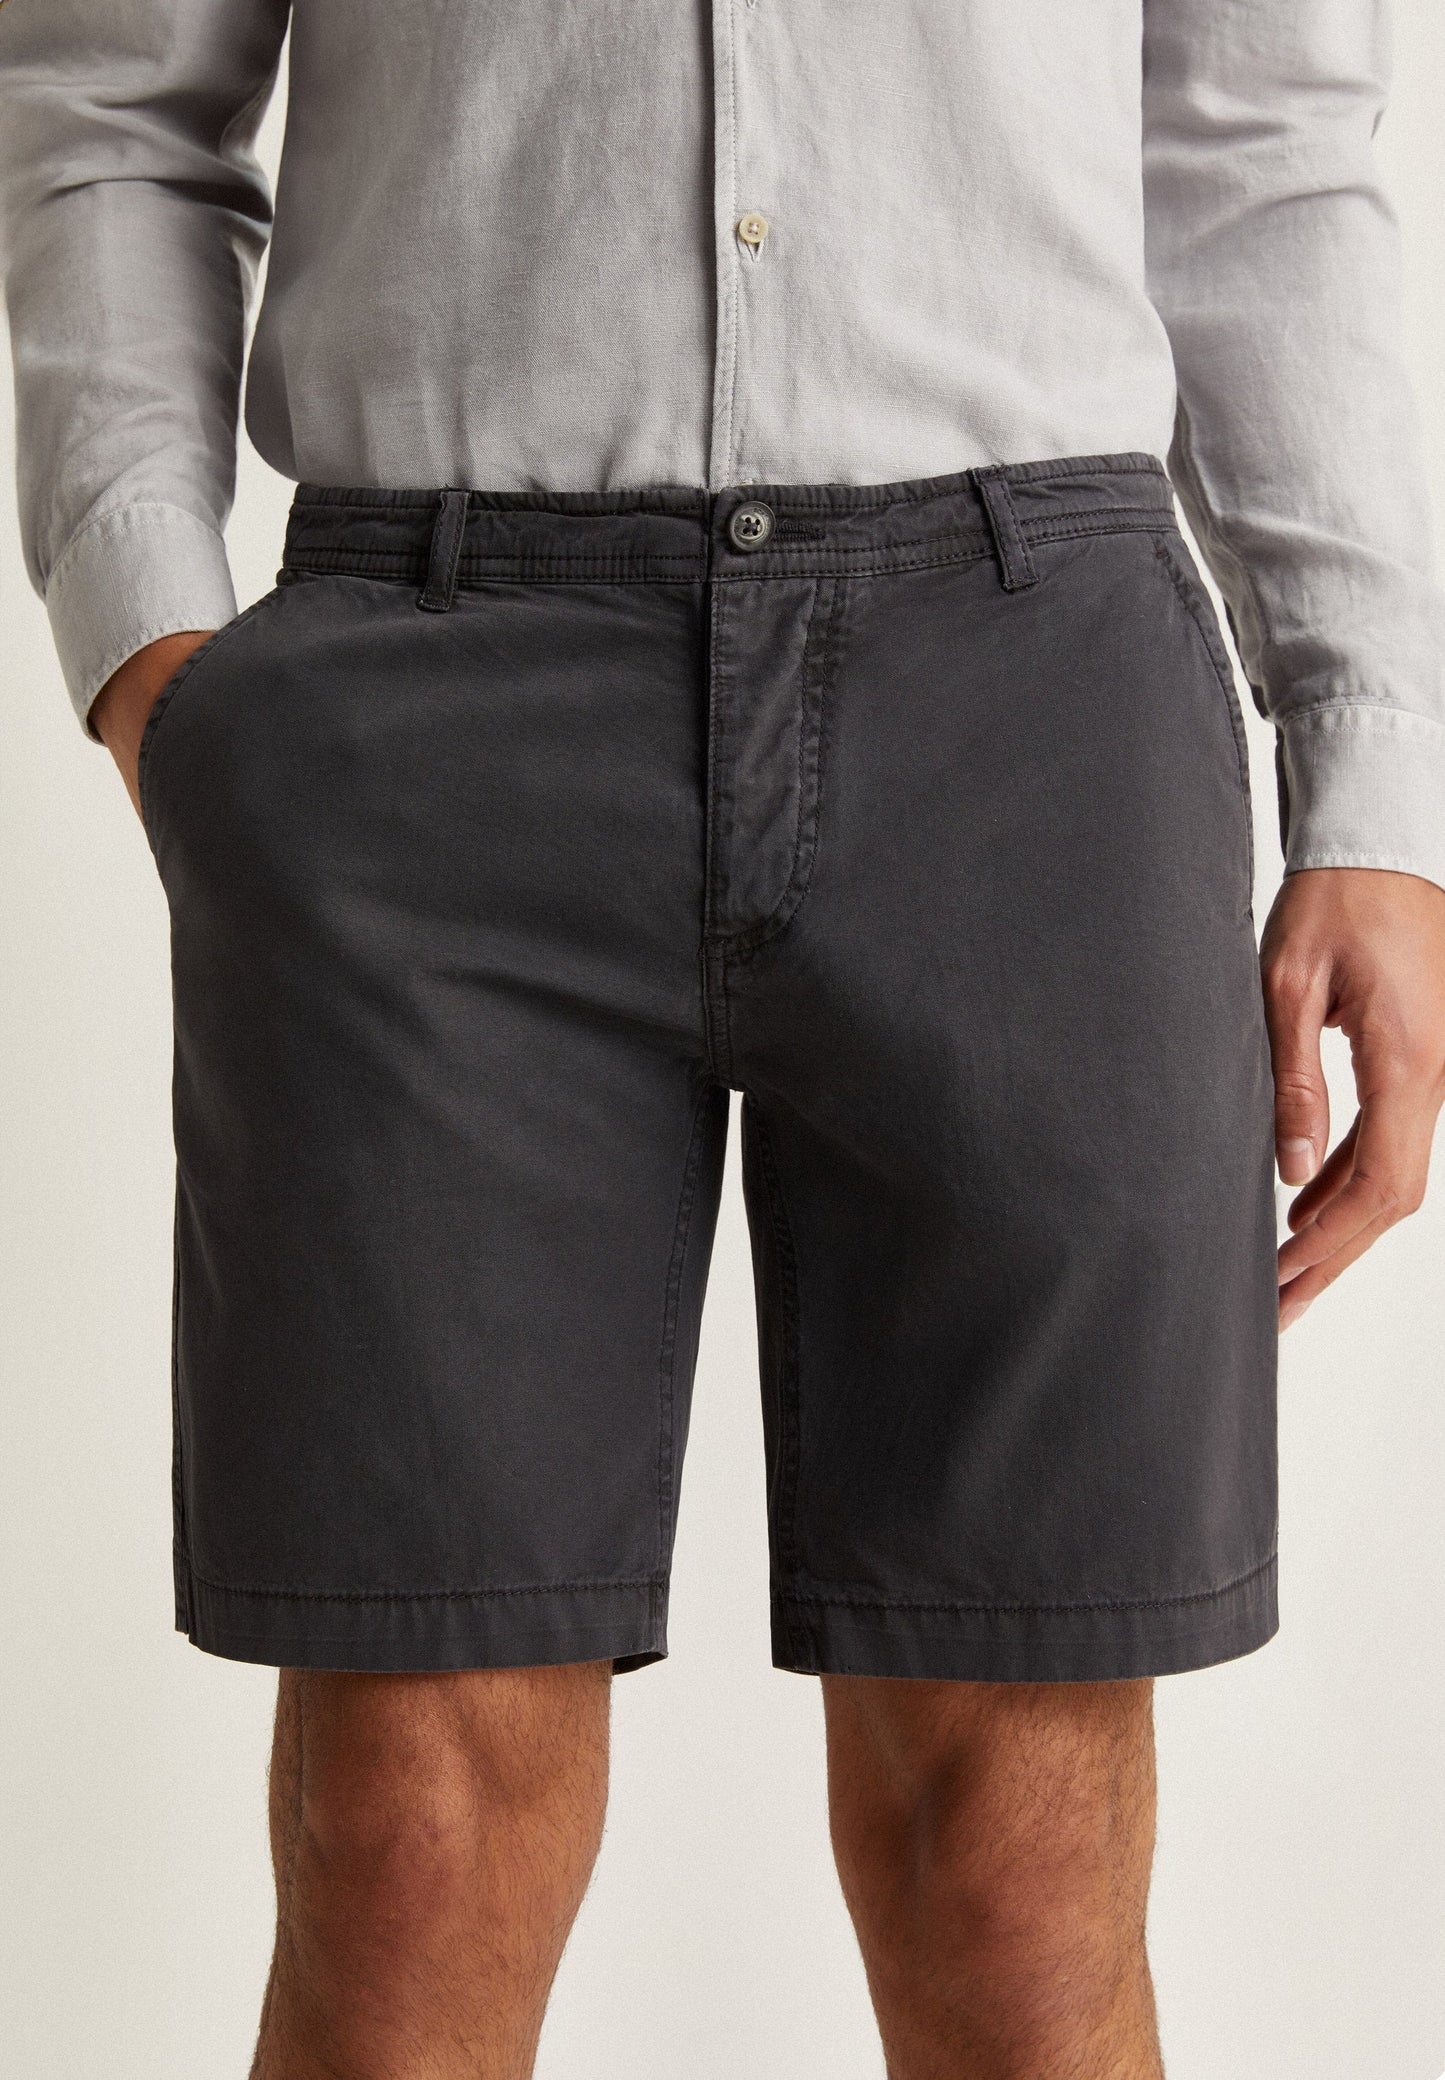 OUTFITTER SHORTS